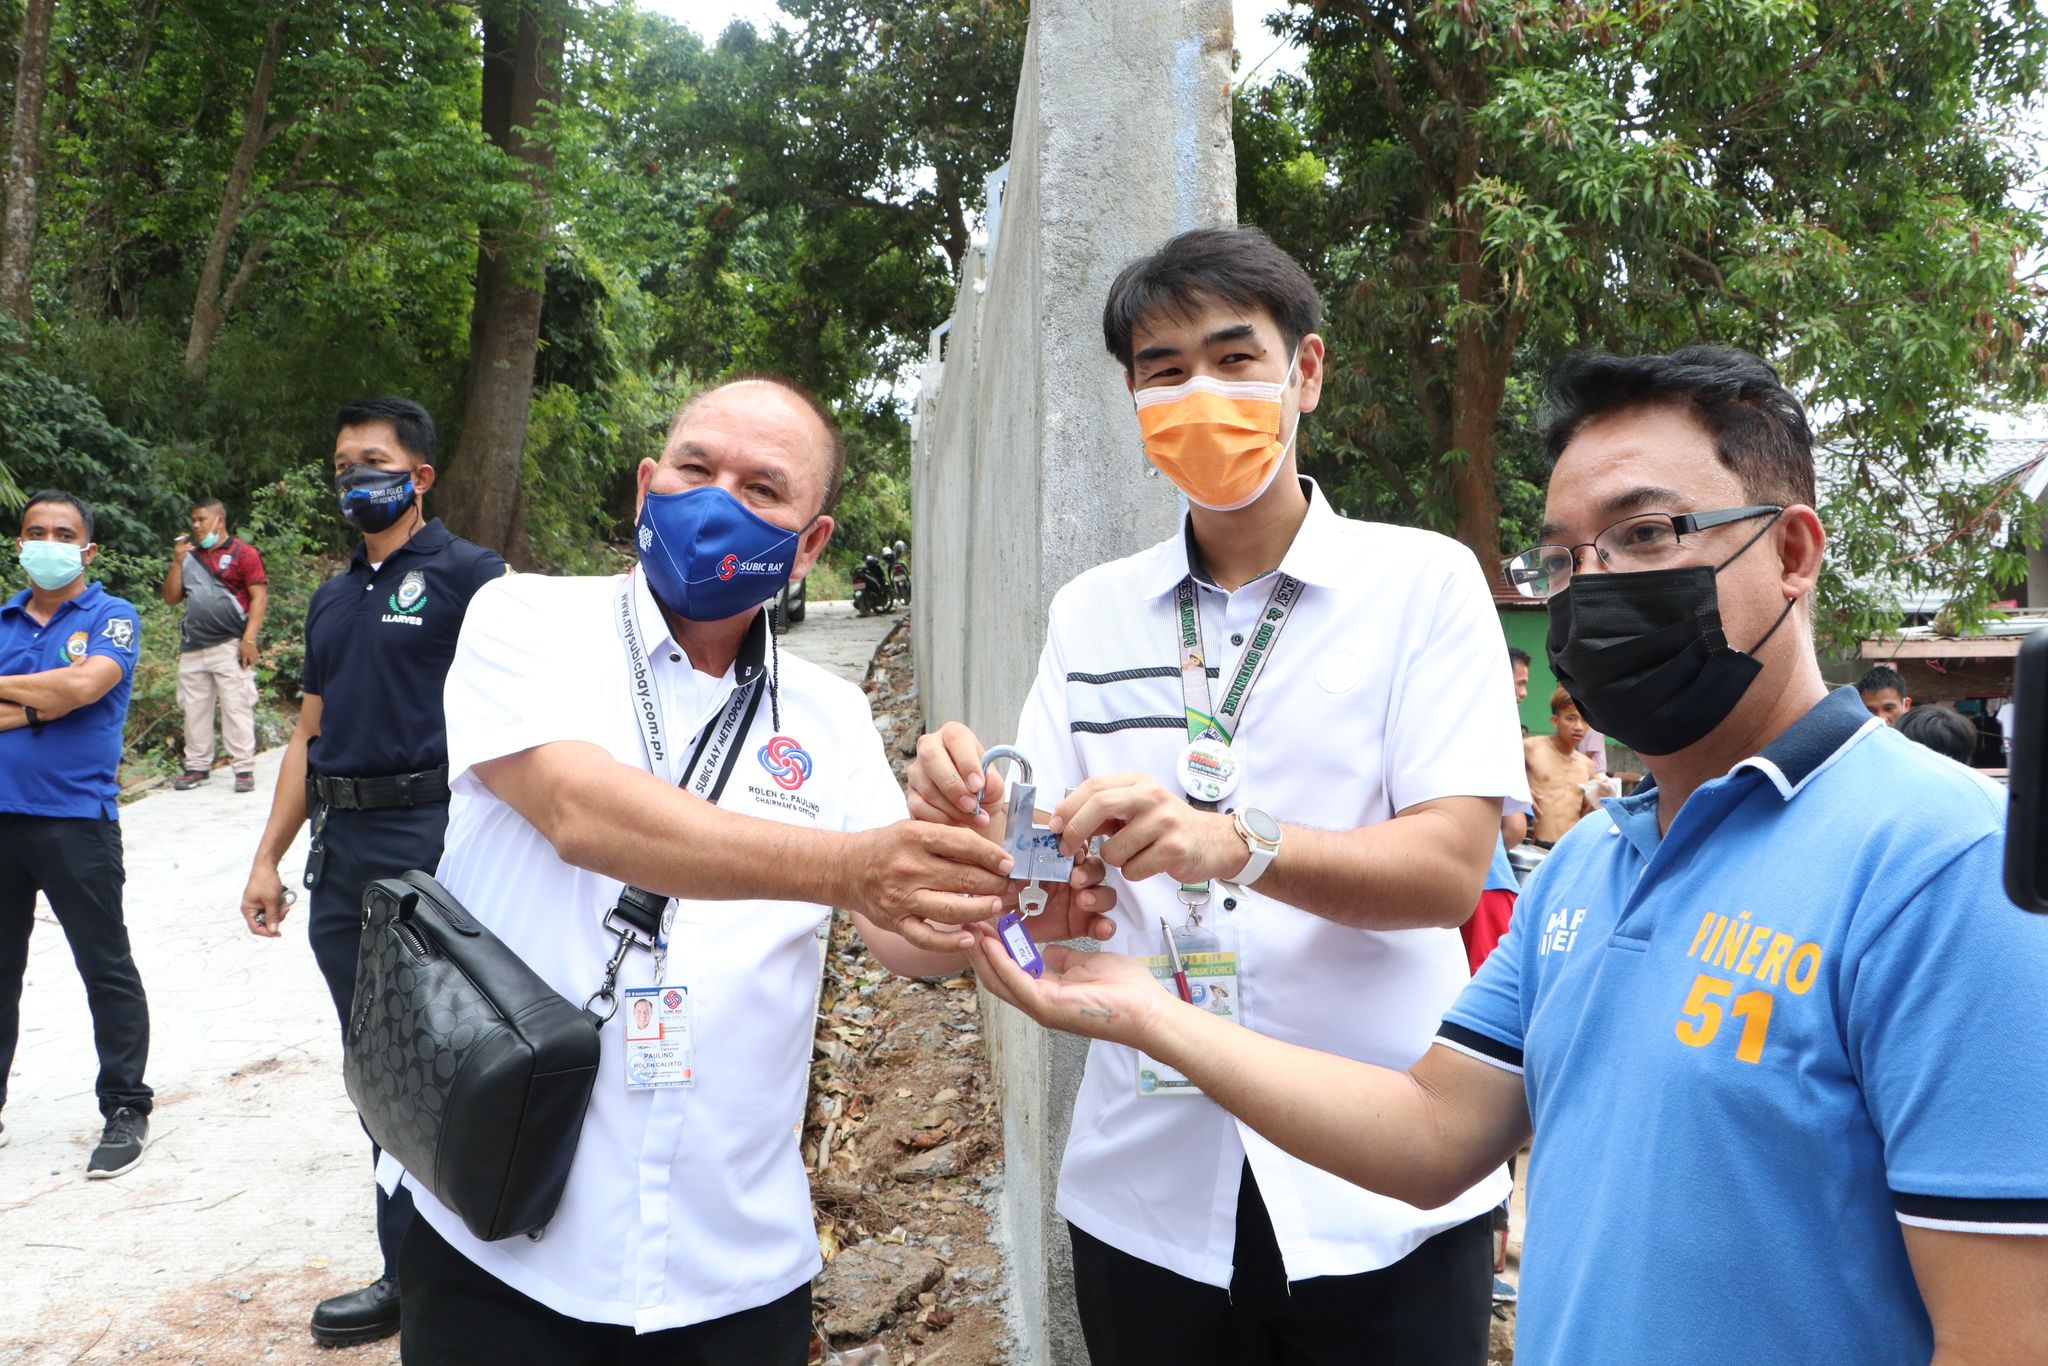 SBMA Chairman and Administrator Rolen C. Paulino symbolically shares access of the perimeter fence to Olongapo City Mayor Lenj Paulino and Barangay Captain Gilbert Piñero of East Bajac-bajac, where the Upper Sibul Elementary School is located.